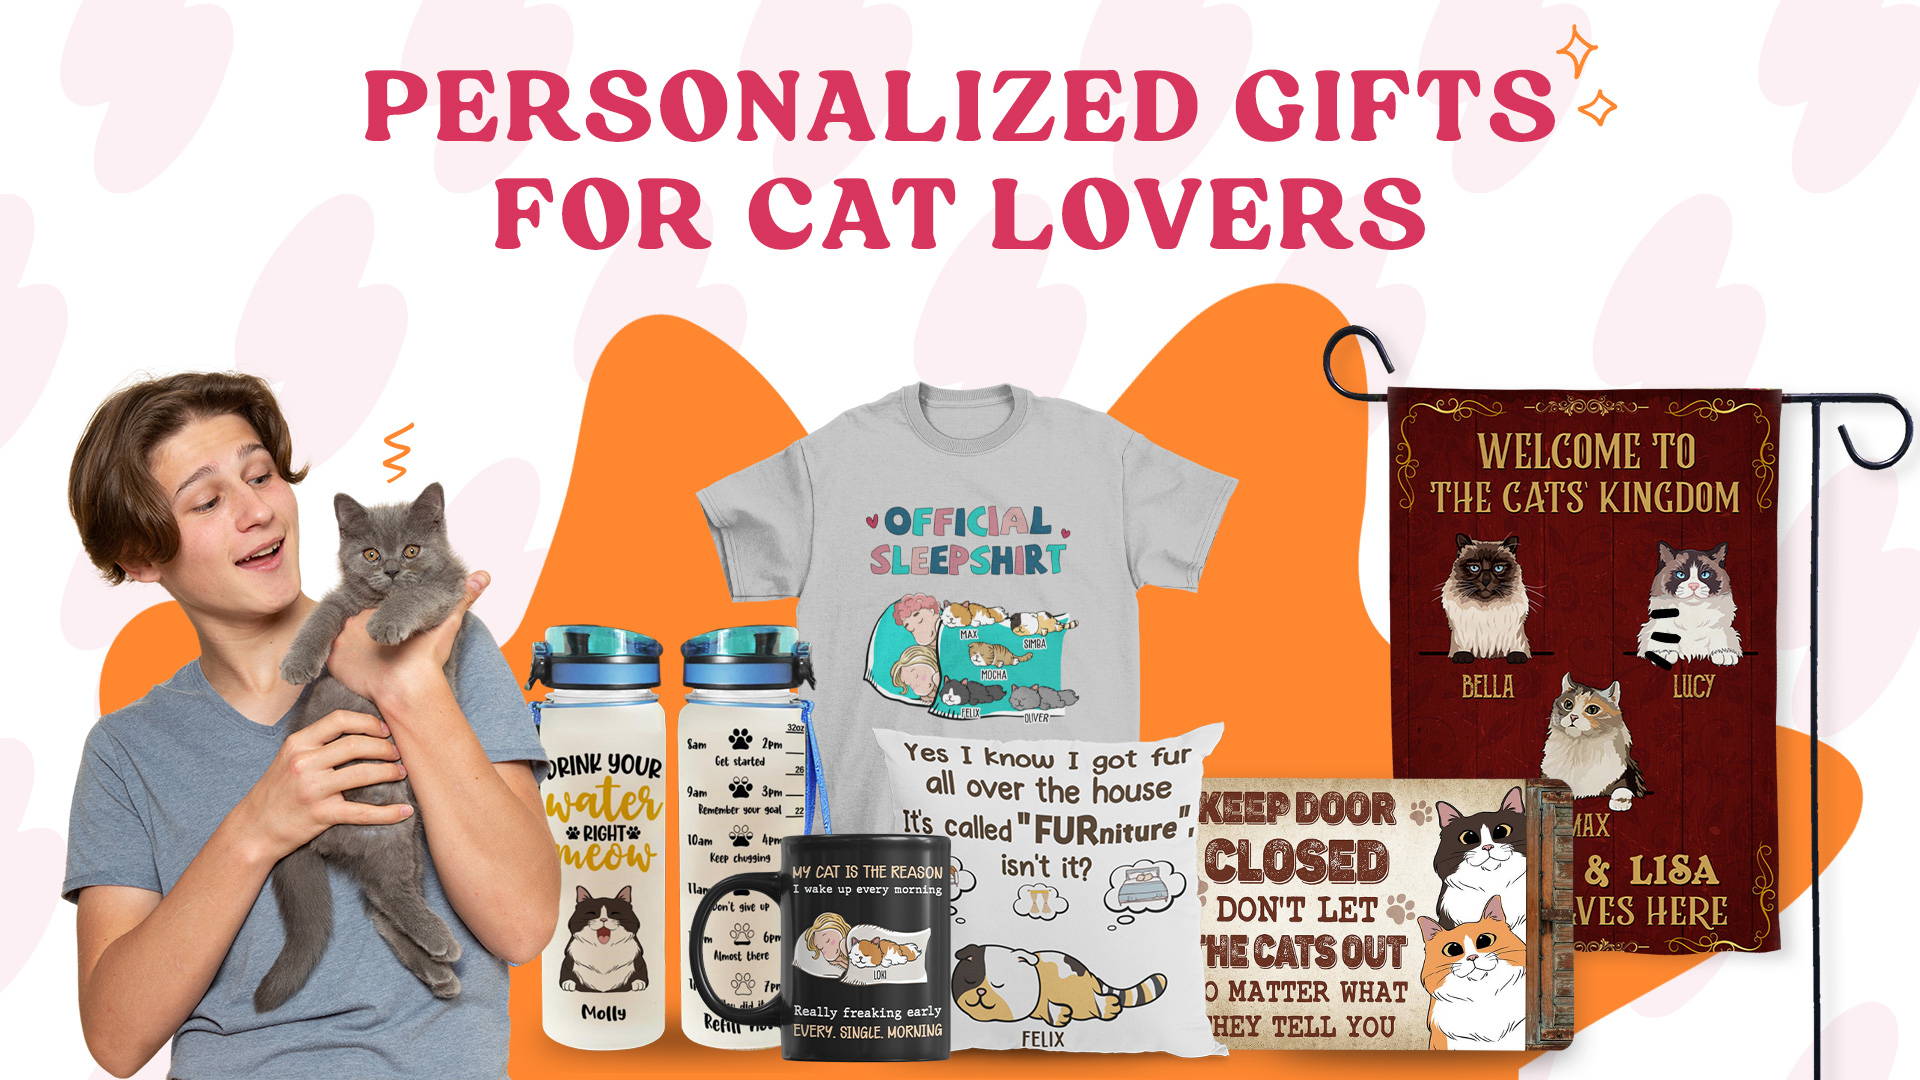 10 Fabulous Personalized Gifts for Cat Lovers – PAWSIONATE